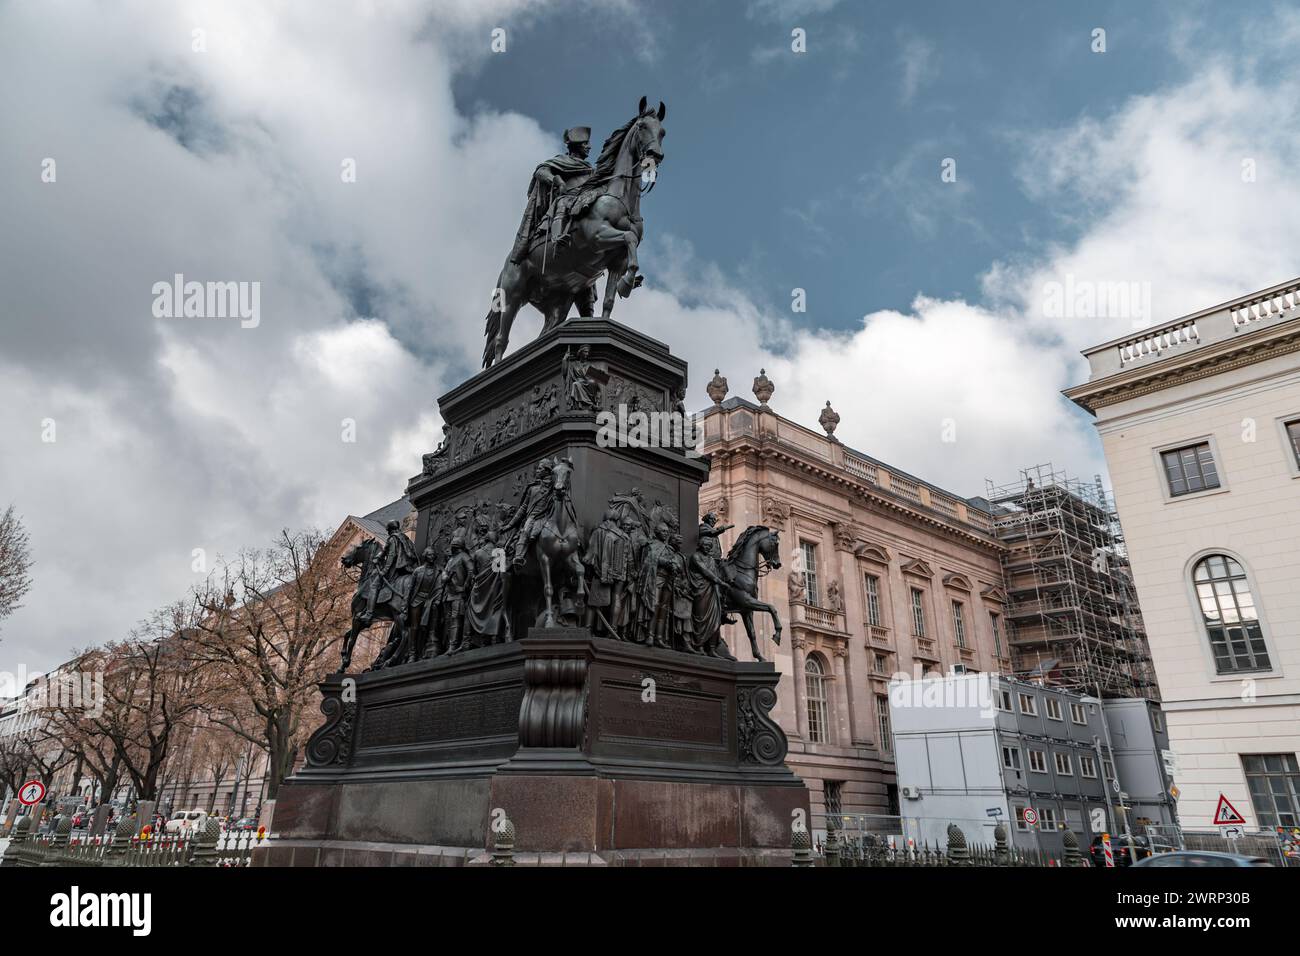 Berlin, Germany - Decmber 16, 2021: The majestic equestrian statue of Frederick the Great at the east end of Unter den Linden, Berlin, Germany. Stock Photo